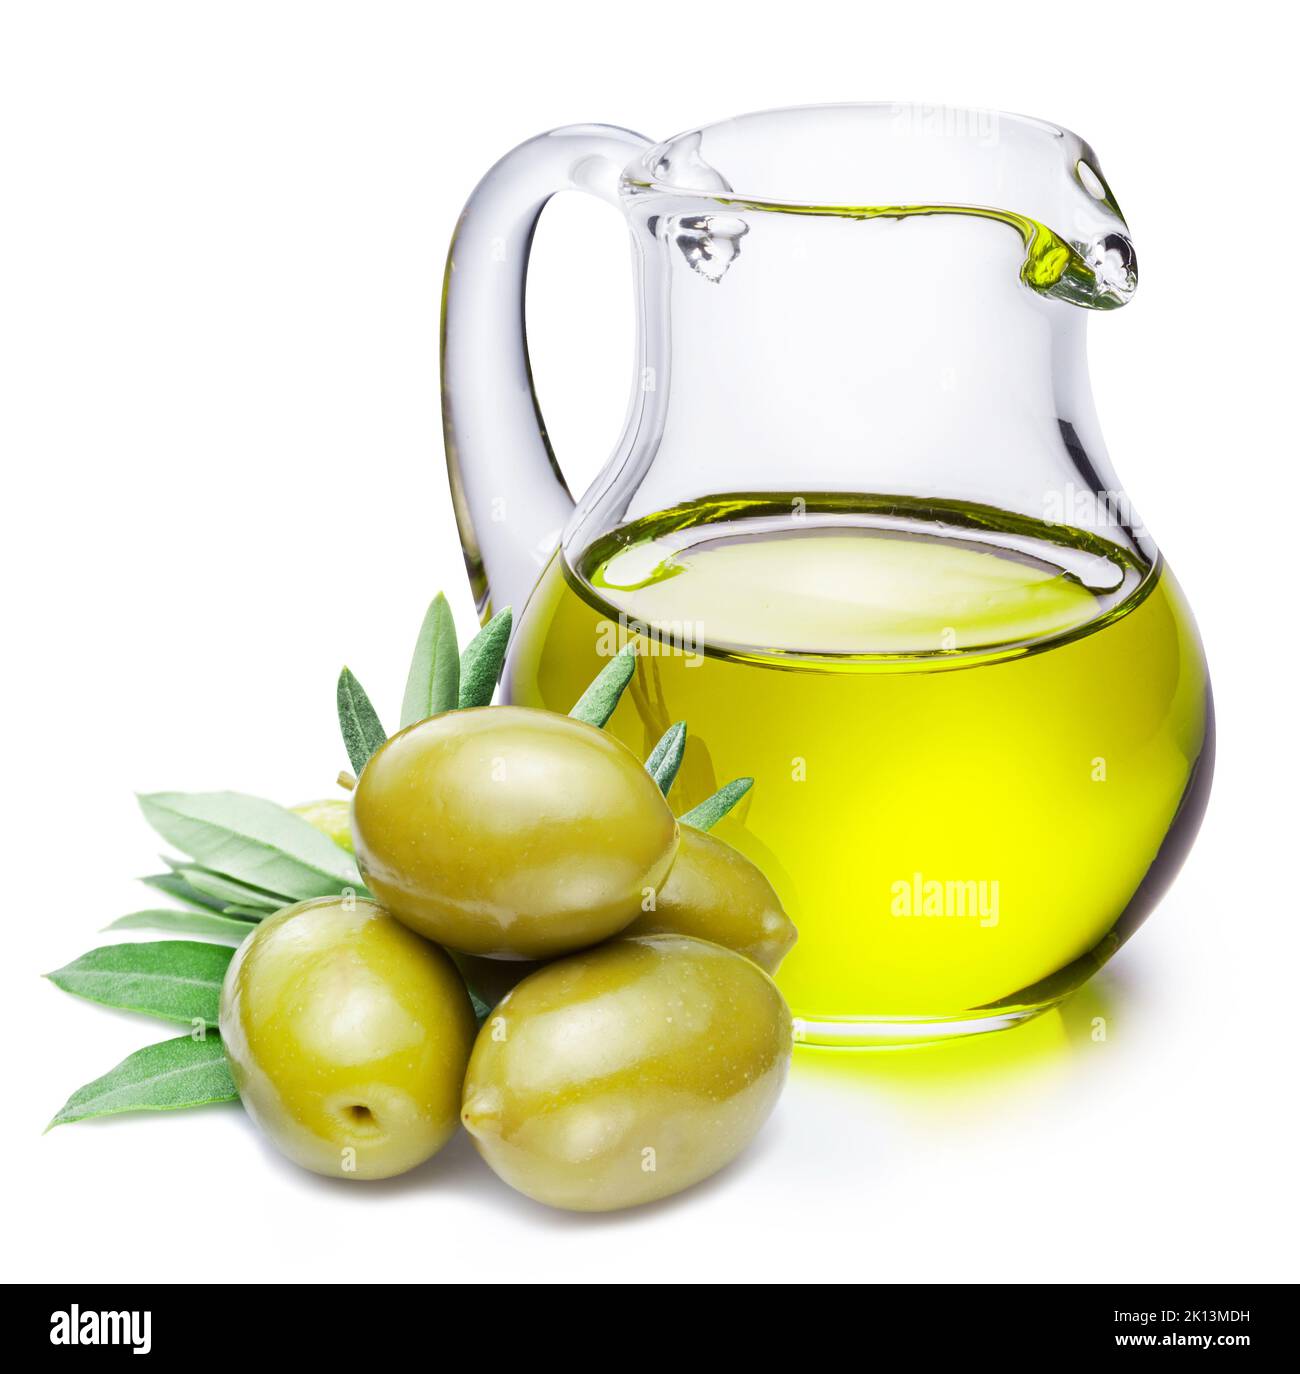 Green natural olives and decanter with olive oil isolated on a white background. Stock Photo